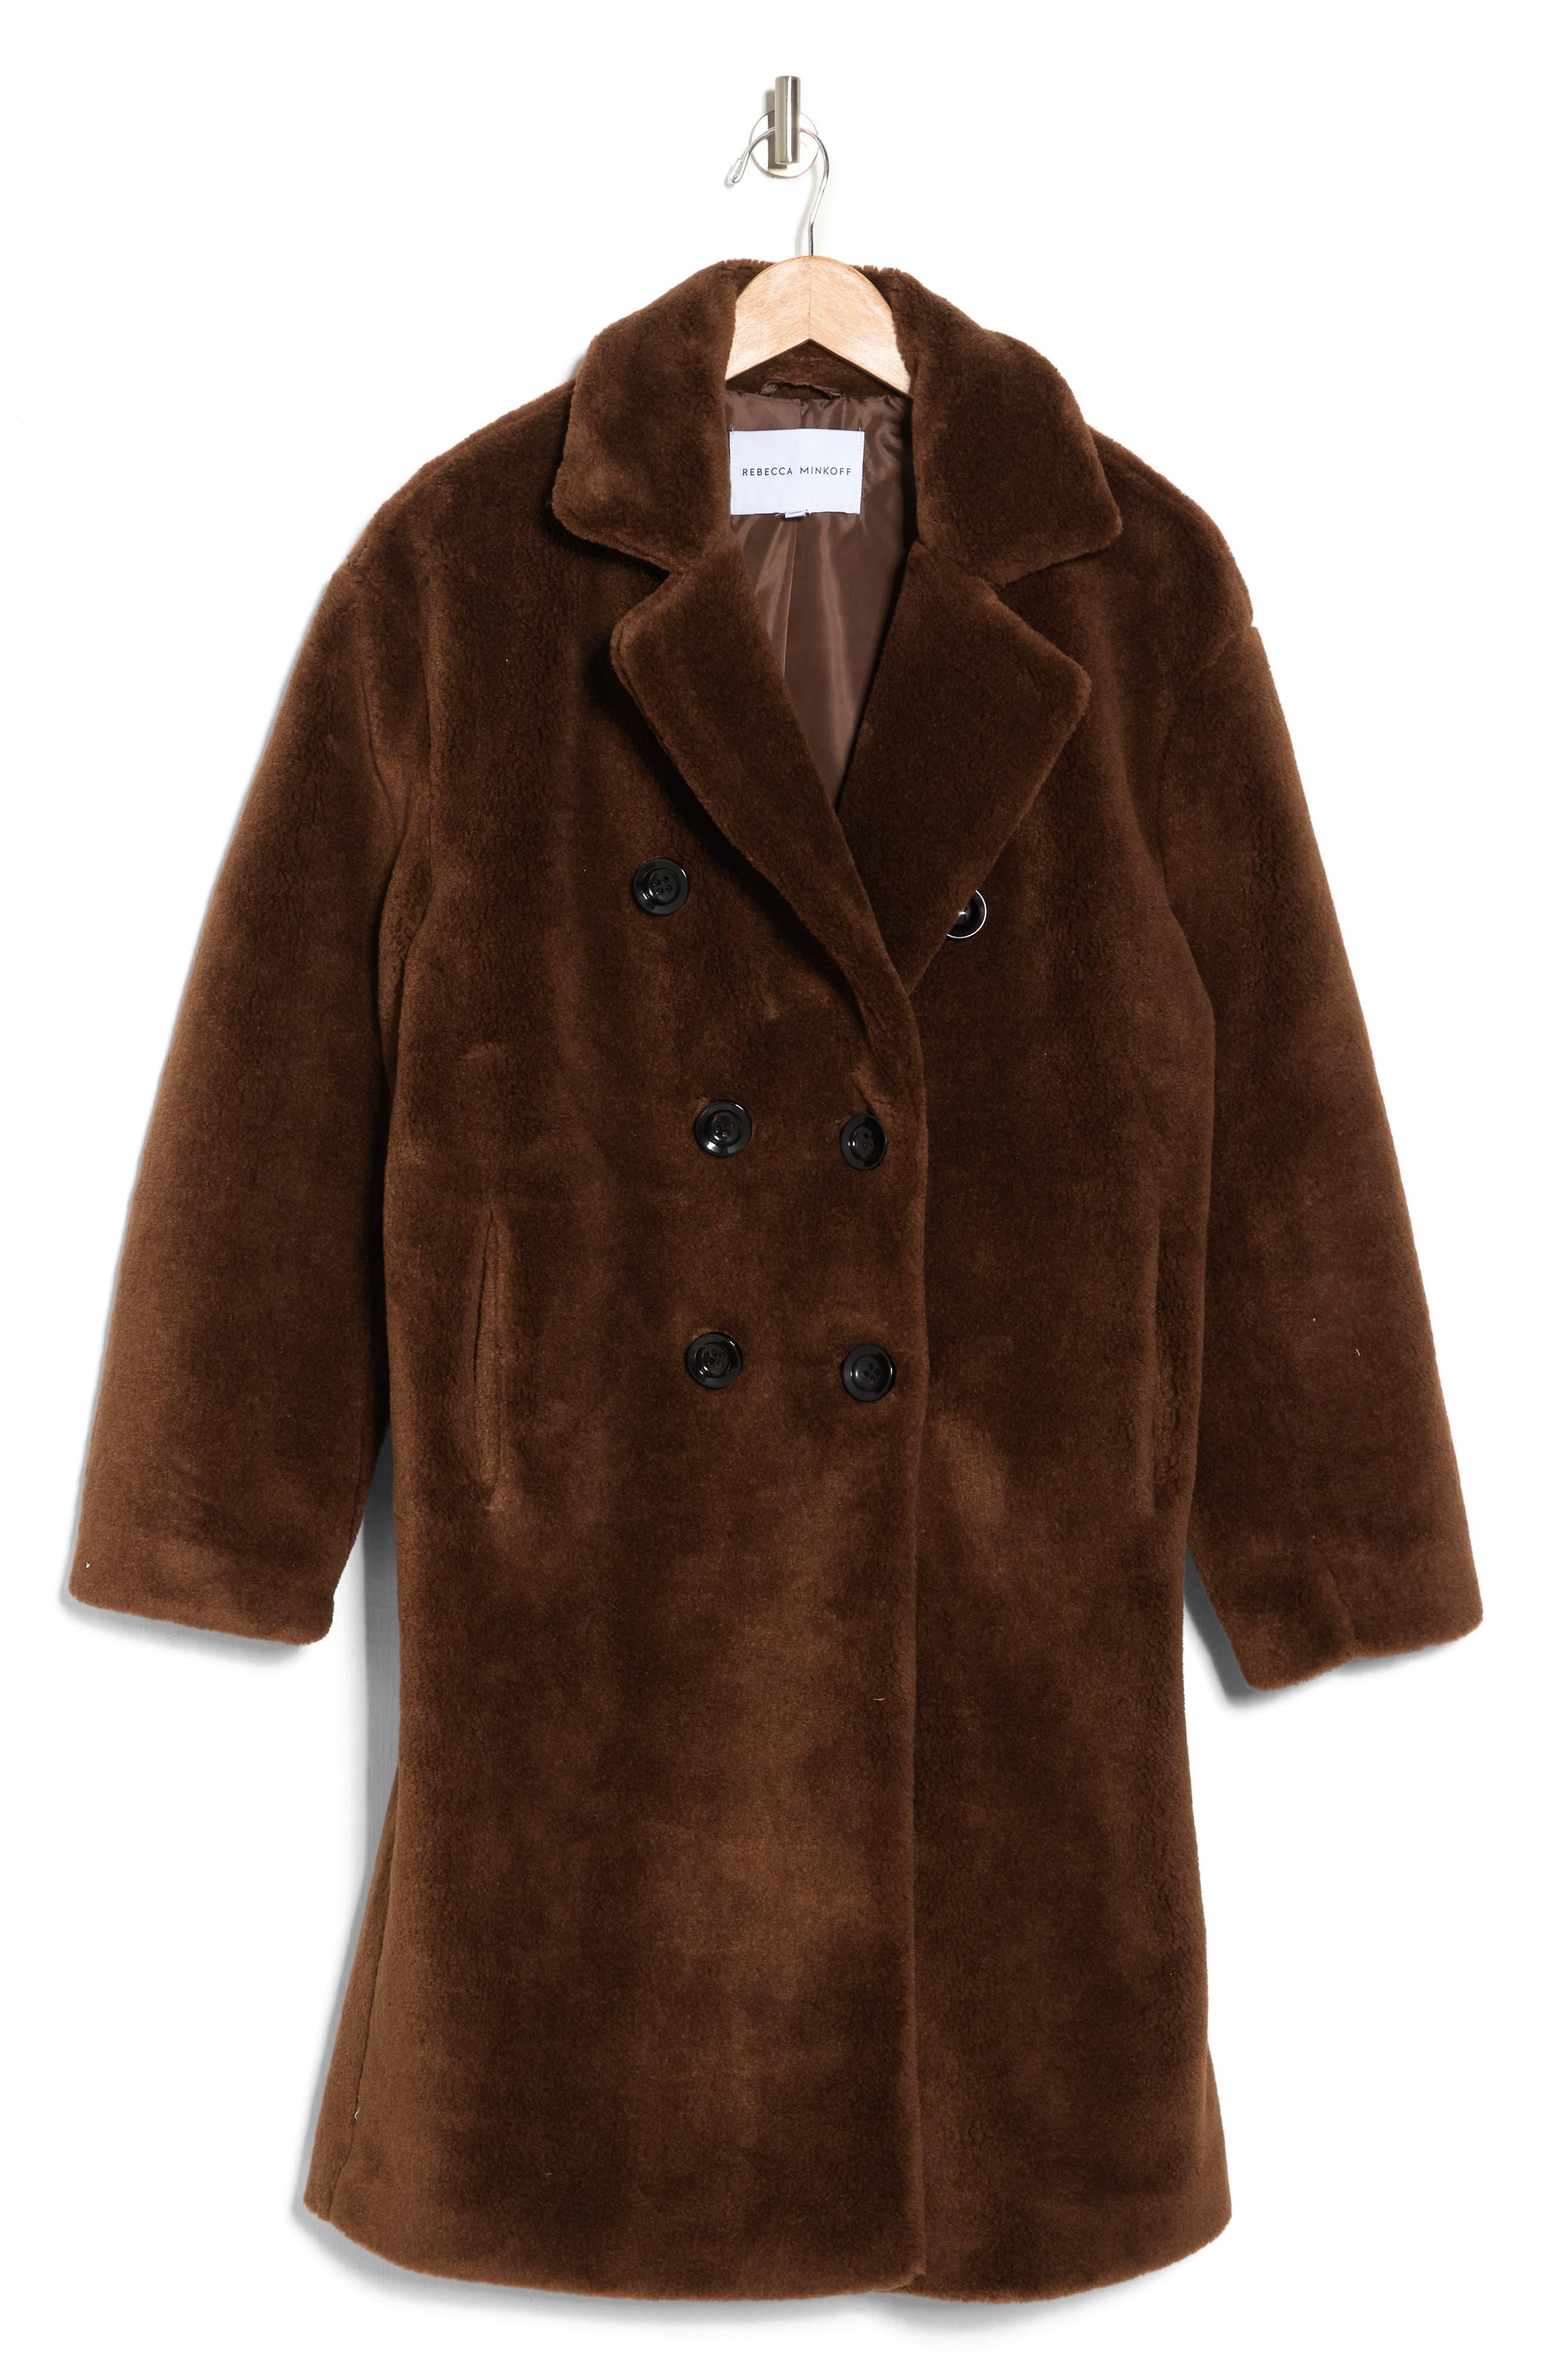 Rebecca Minkoff Faux Shearling Double Breasted Coat in Brown